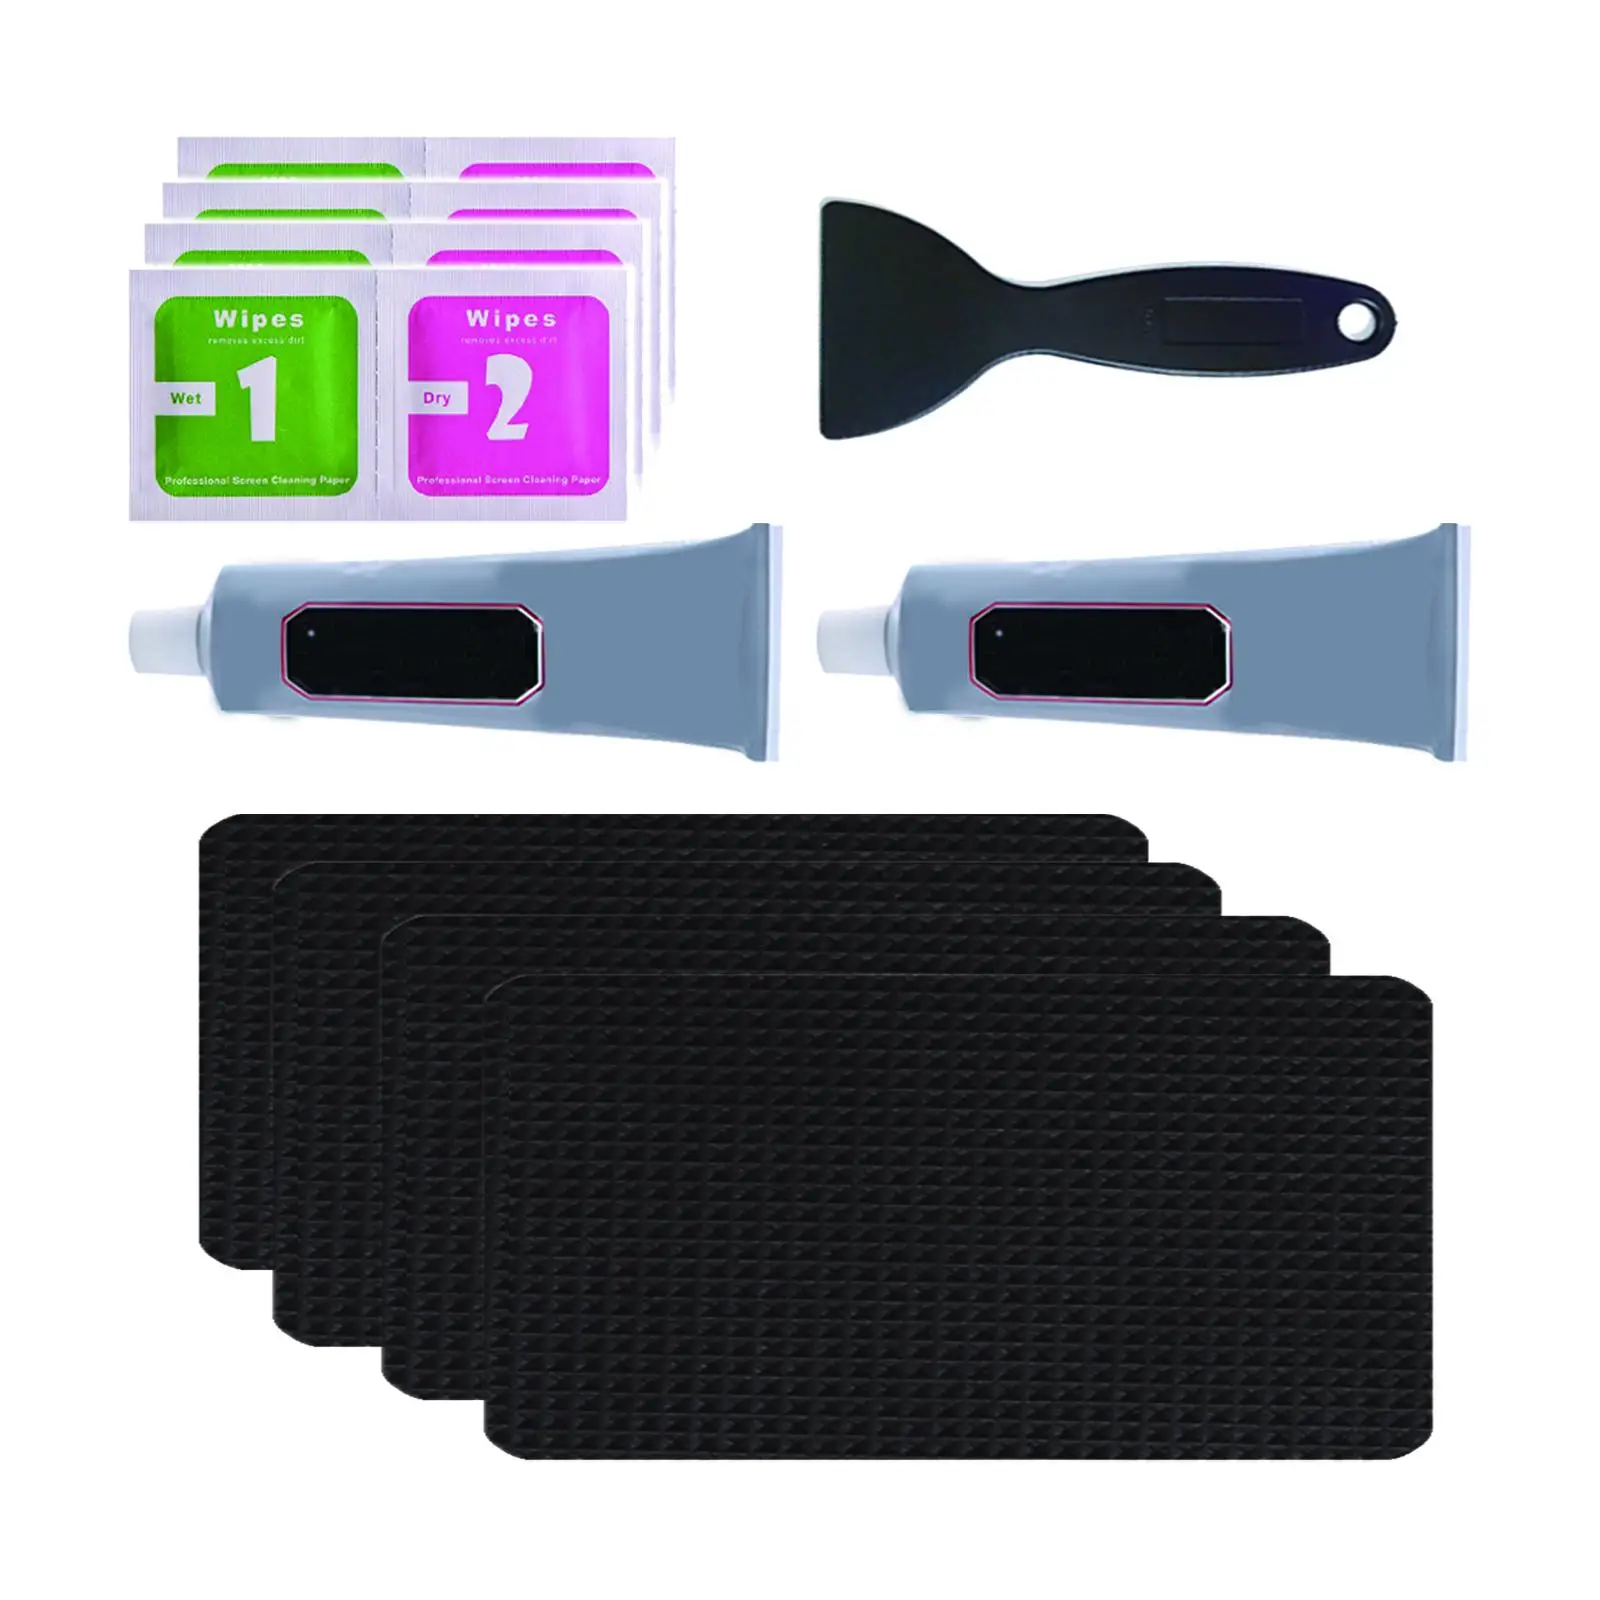 Trampoline Repair Kit Trampoline Replacement Mat Rectangular on Patches Repairing Tools for Outdoor Tent